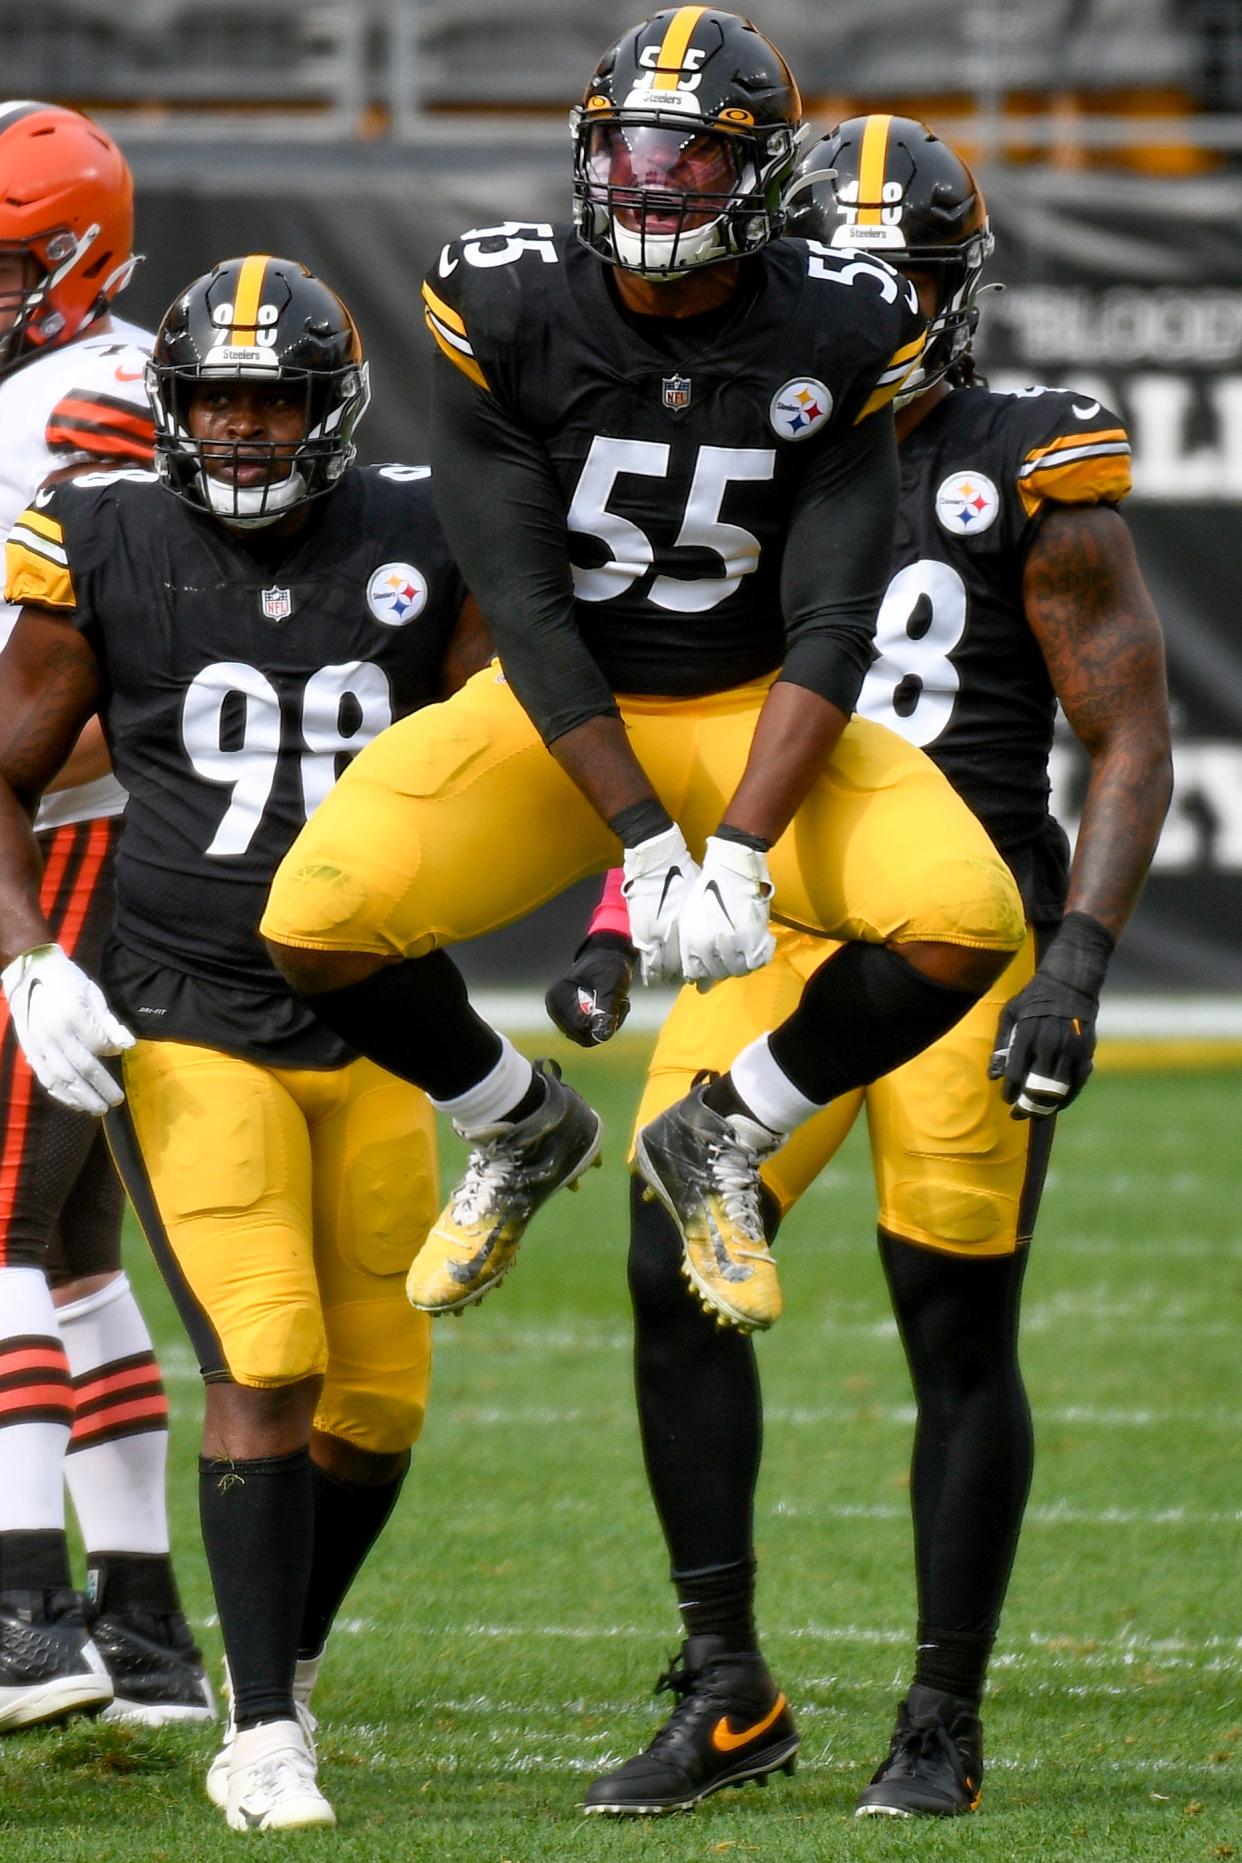 Pittsburgh Steelers inside linebacker Devin Bush (55) celebrates a defensive play against the Cleveland Browns during the first half of an NFL football game, Sunday, Oct. 18, 2020, in Pittsburgh. (AP Photo/Don Wright)